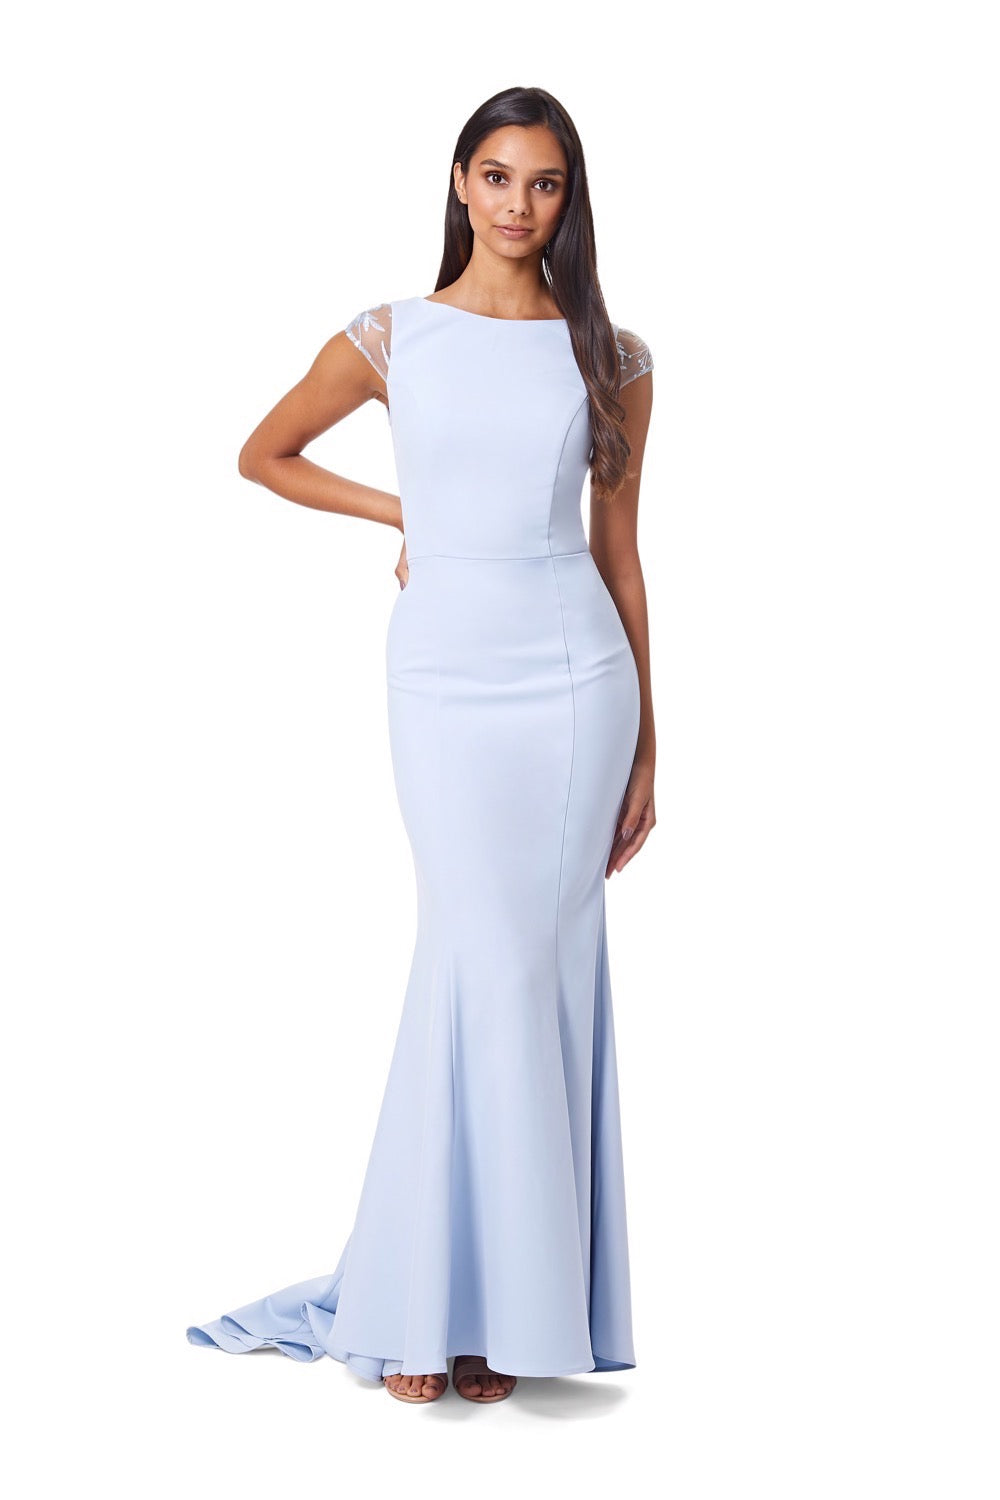 Masa Fishtail Maxi Dress with Lace Cap Sleeves and Embroidered Button Back, UK 8 / US 4 / EU 36 / Powder Blue